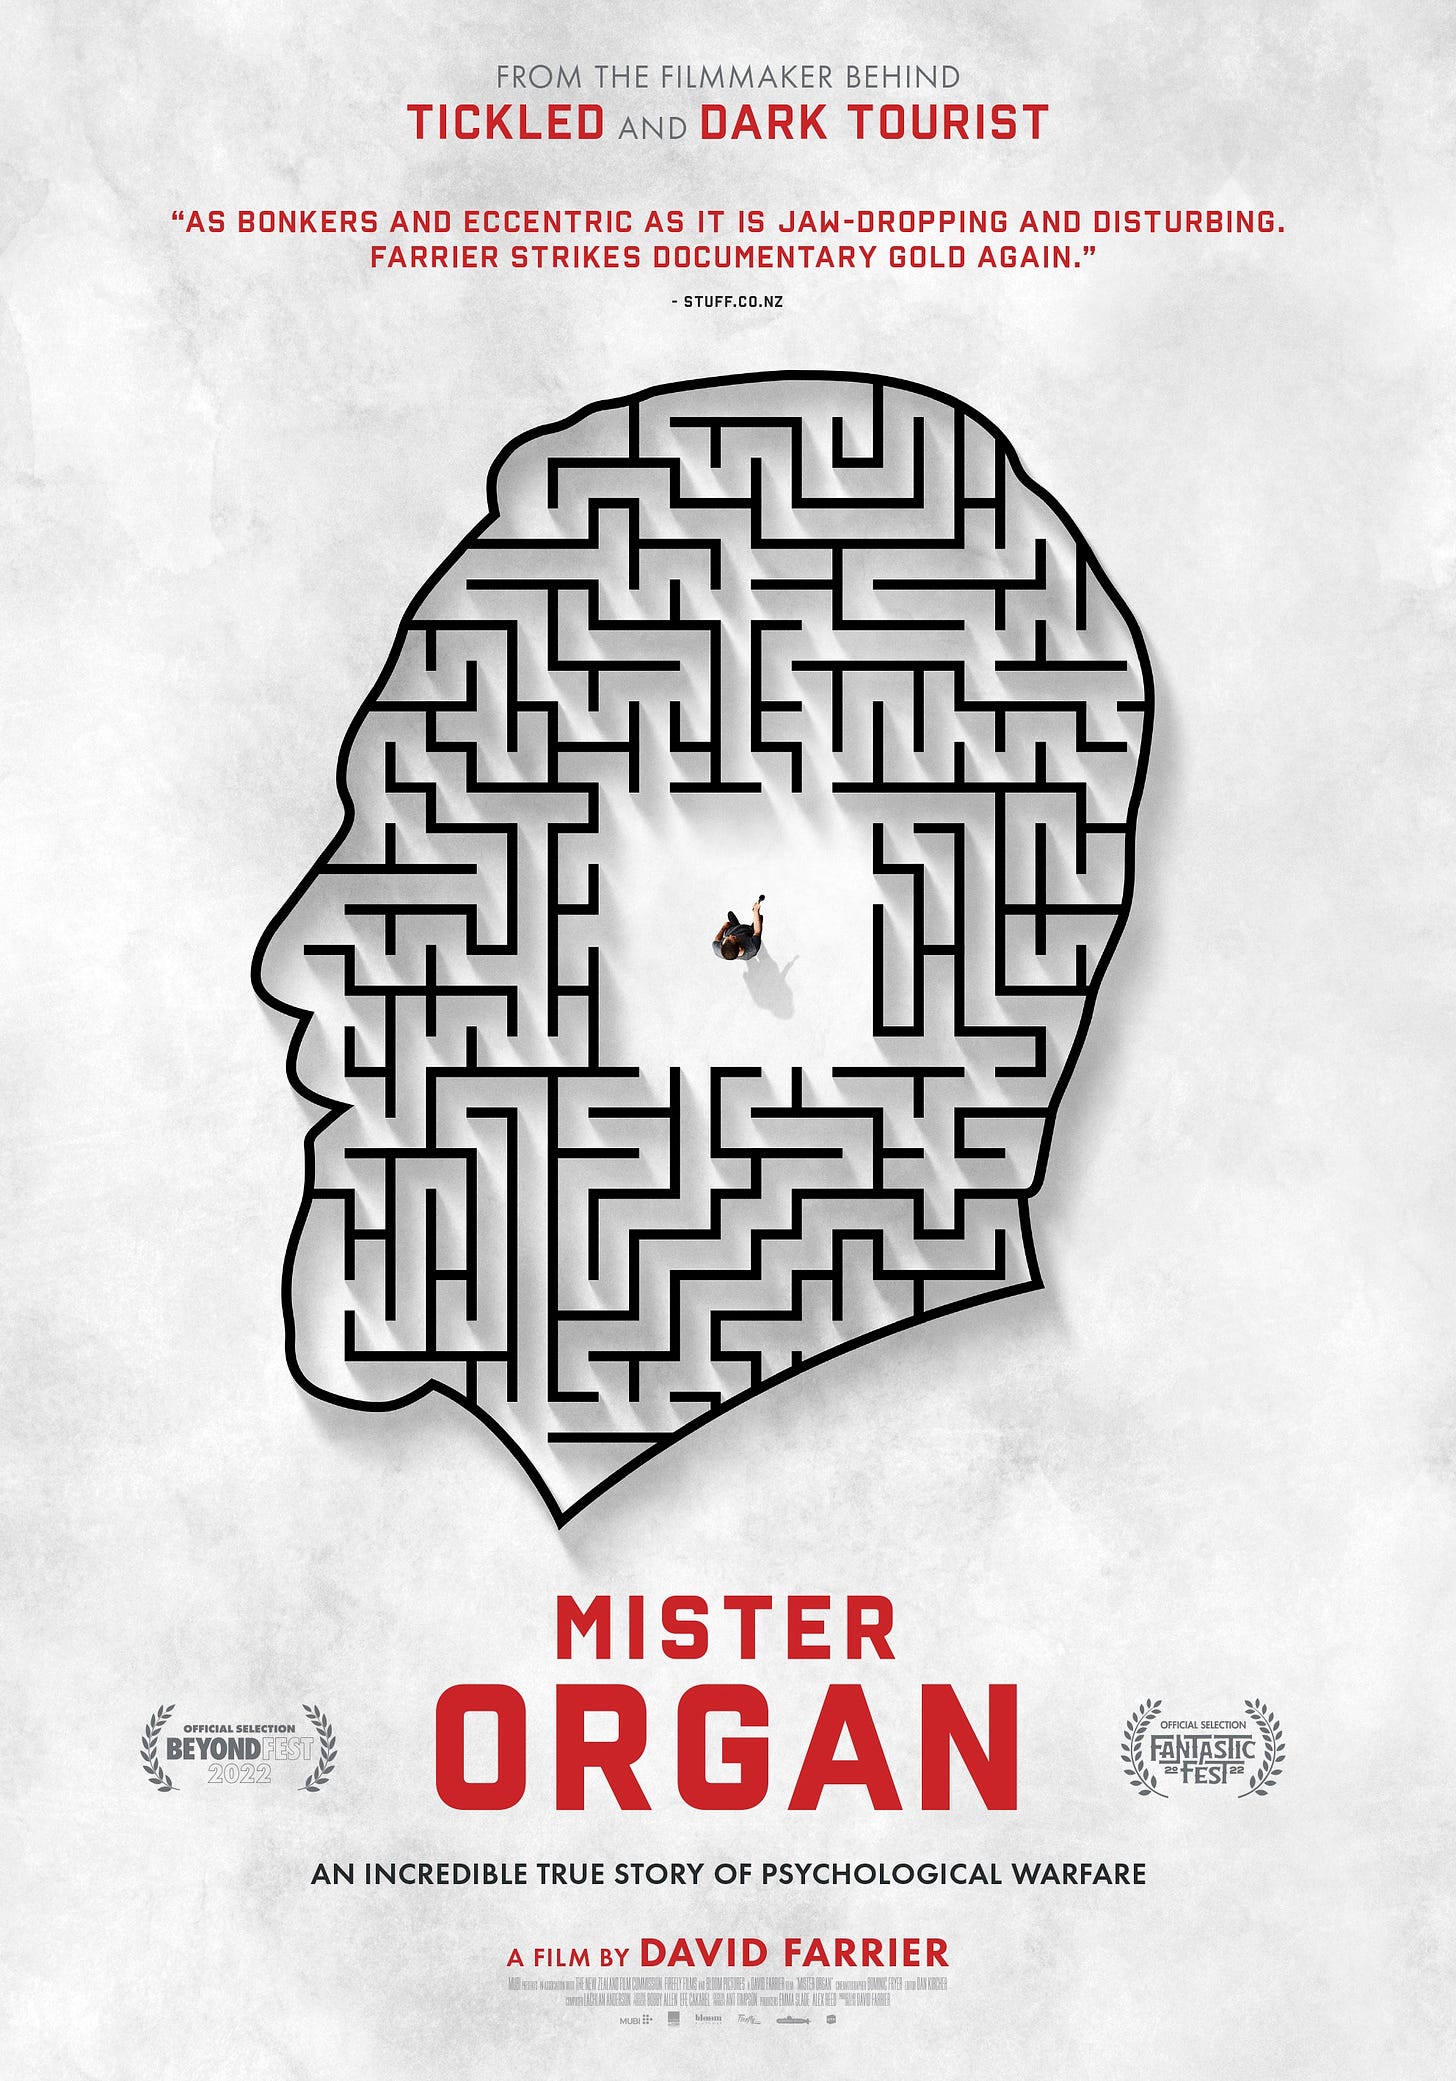 The poster showing a maze of Mister Organ's head, and me standing in the centre of it